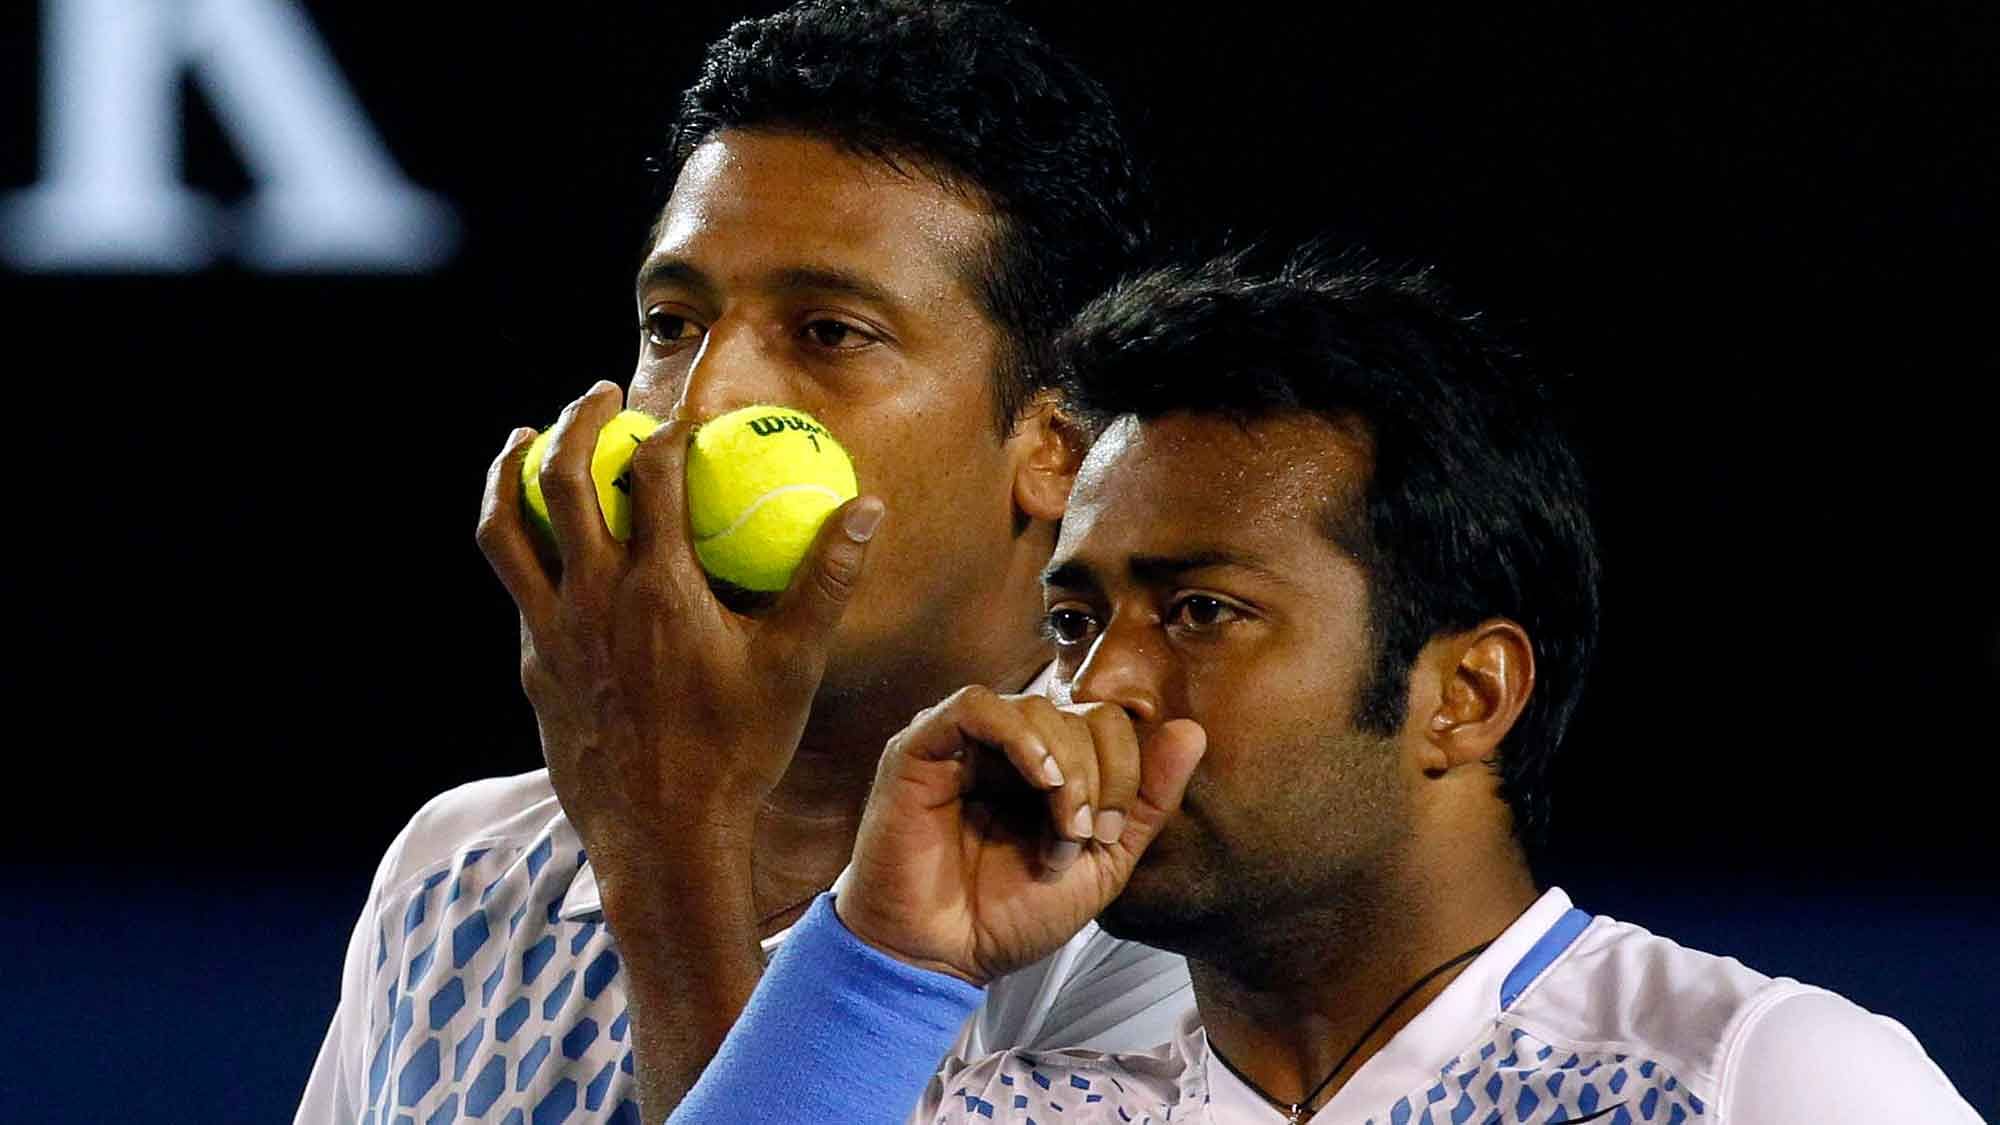 Leander Paes and Martina Navratilova will face off against Mahesh Bhupathi and Sania Mirza in doubles matches to be played in three Indian cities. (Photo: Reuters)